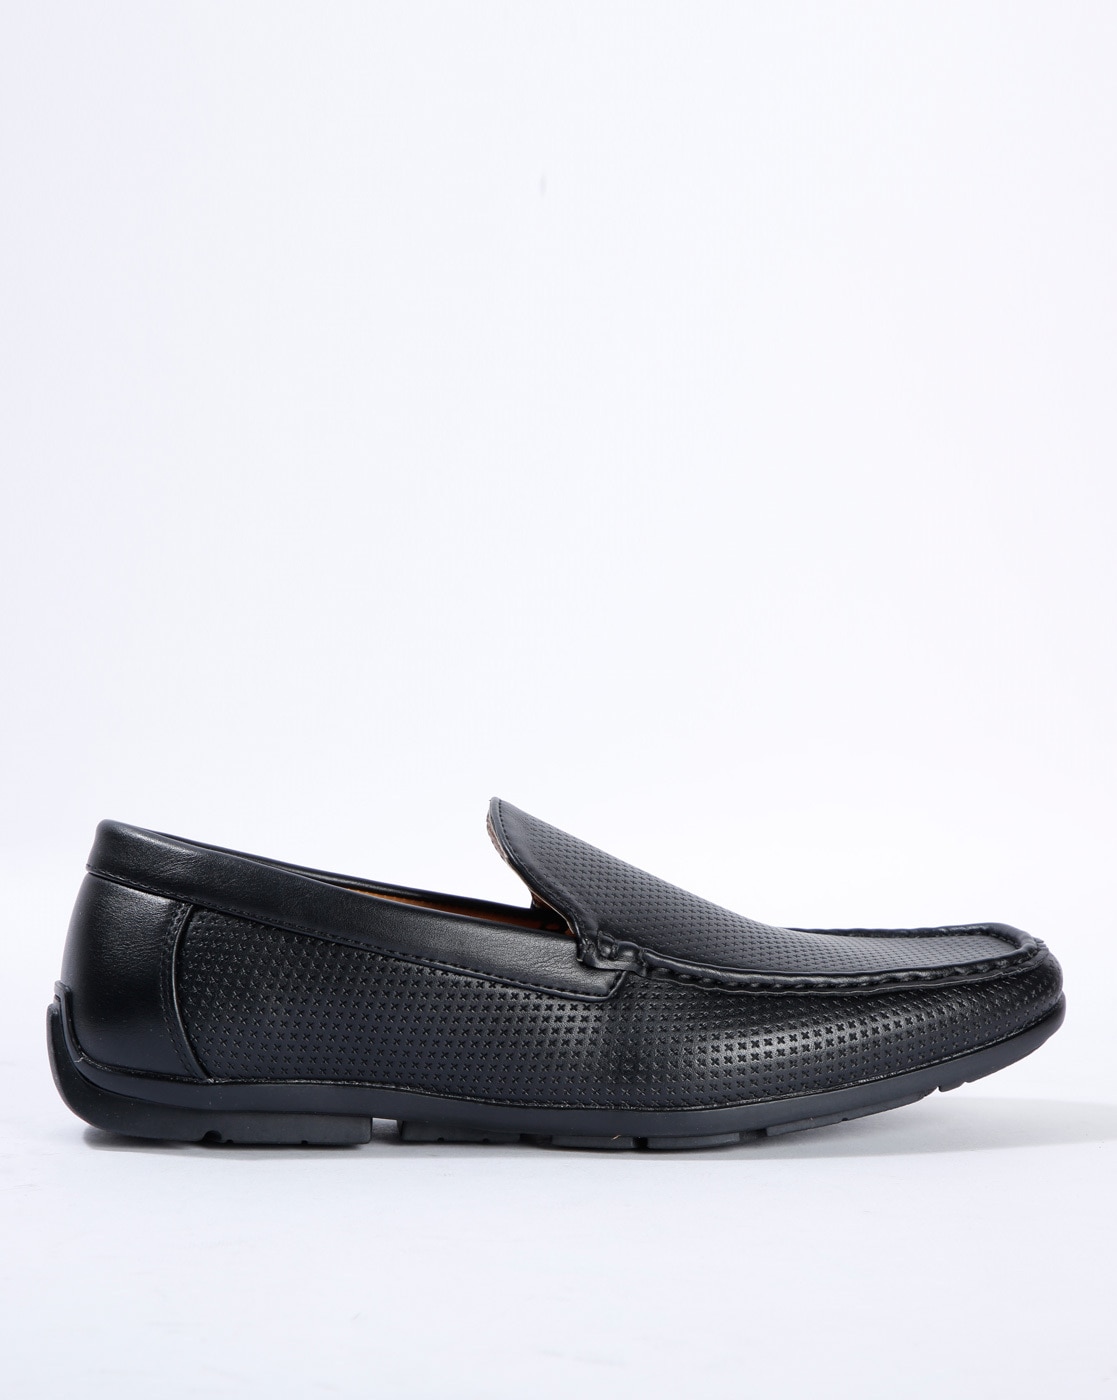 ajio loafer shoes